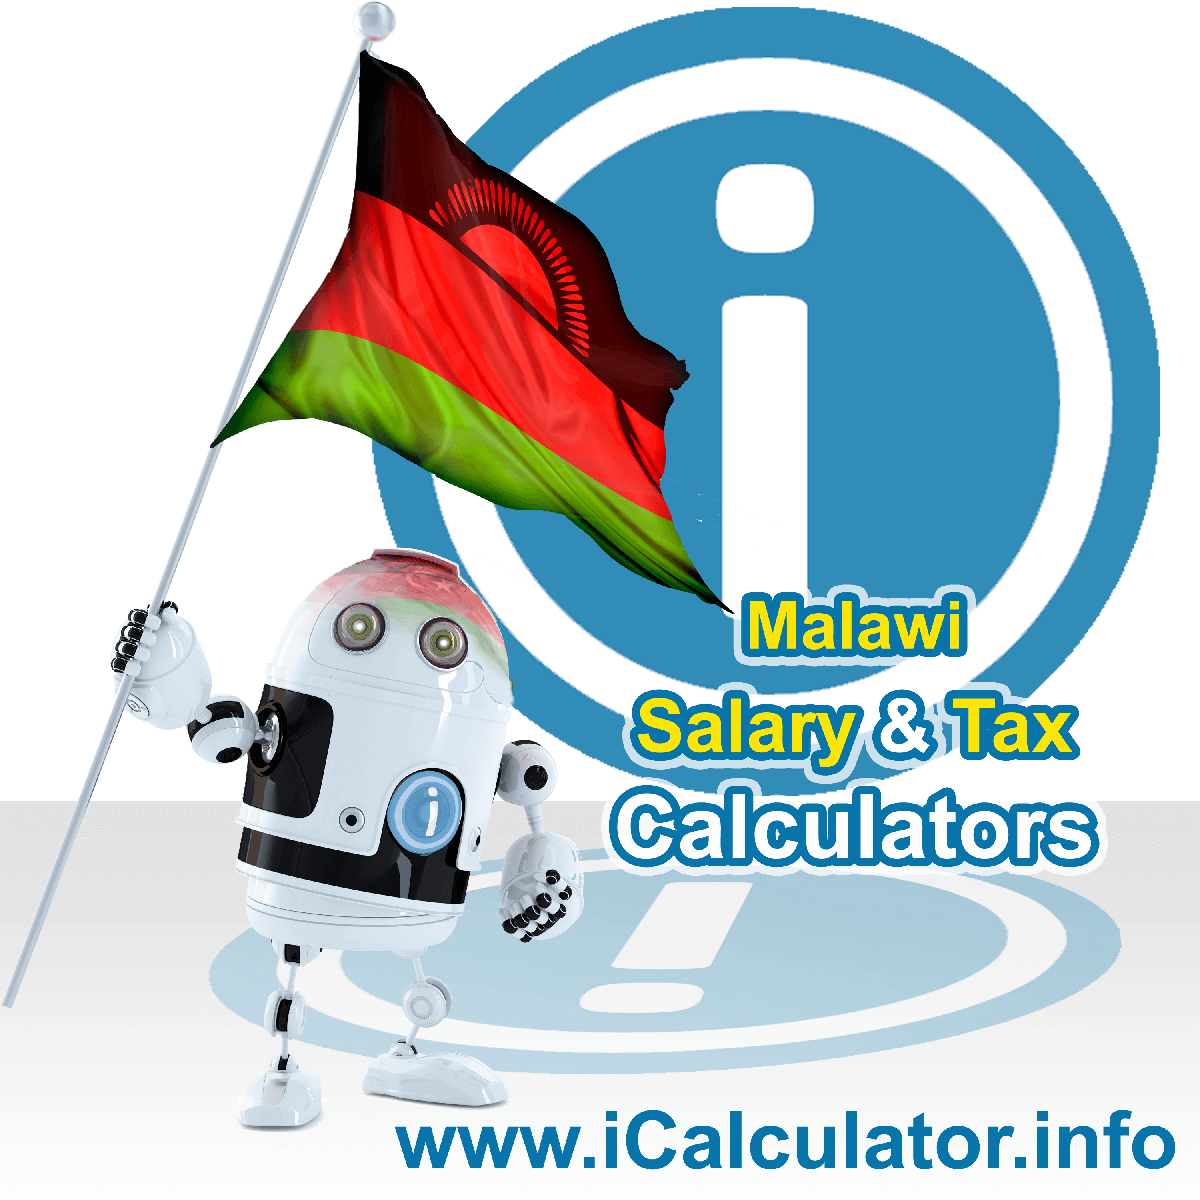 Malawi Tax Calculator. This image shows the Malawi flag and information relating to the tax formula for the Malawi Salary Calculator